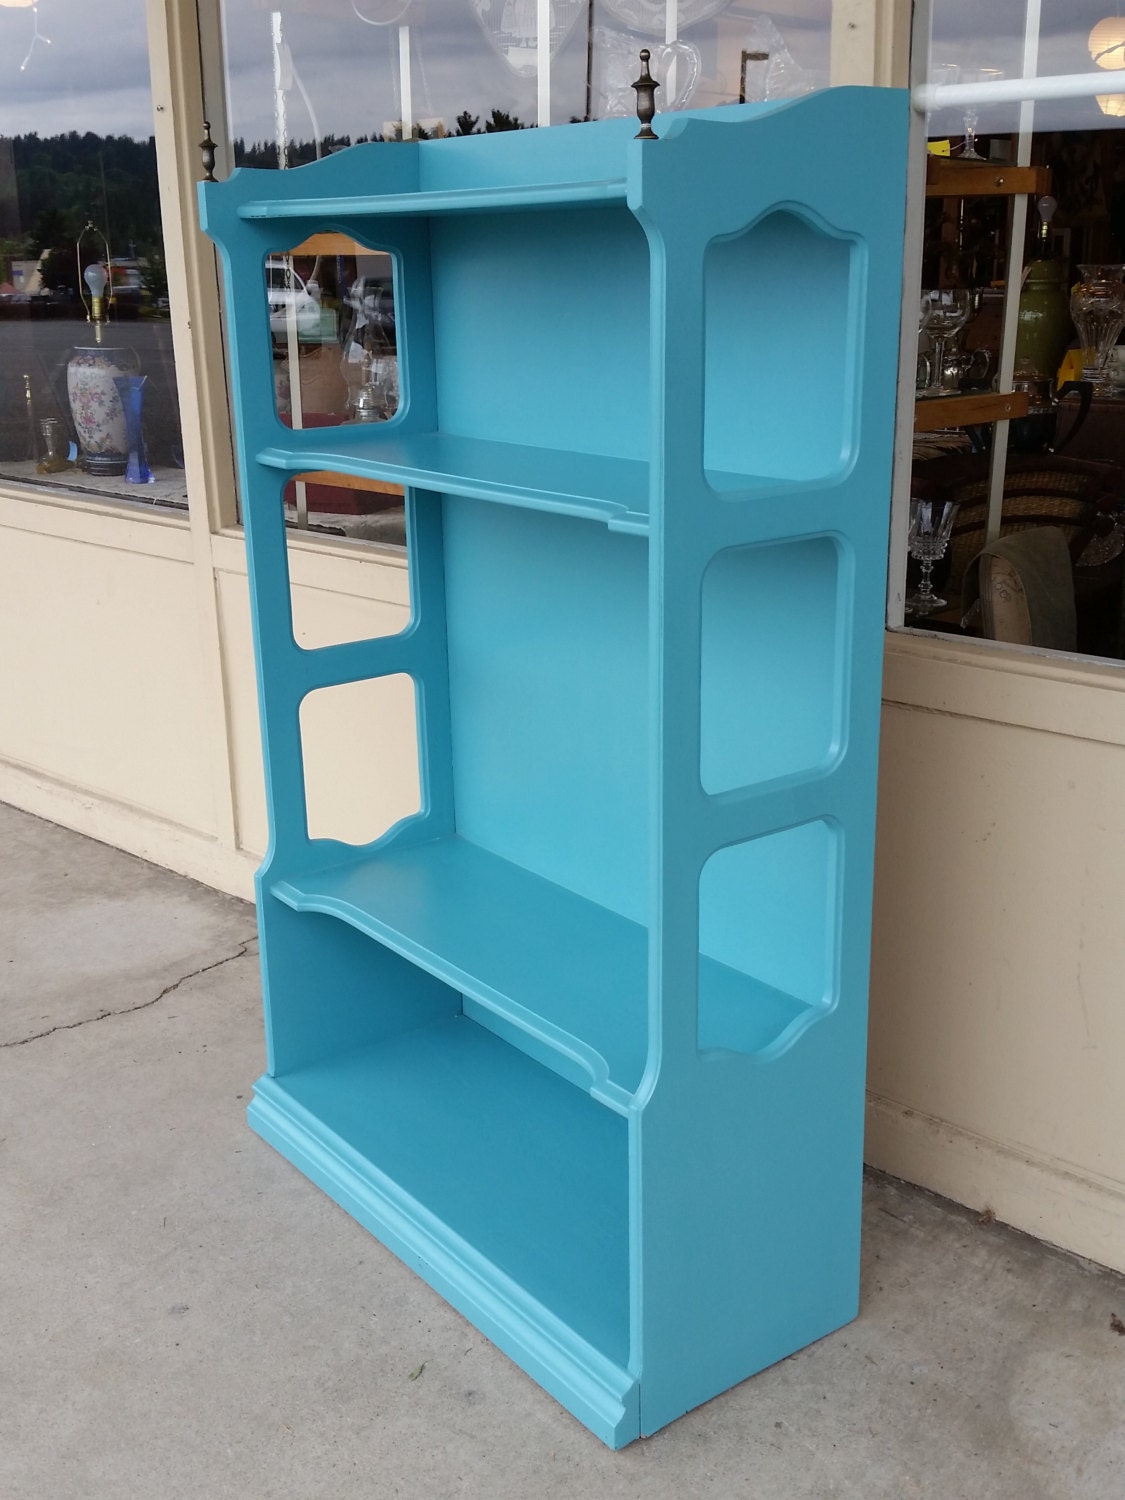 3'x5' Chalk painted bookcase turquoise by TheLivingRoomConsign